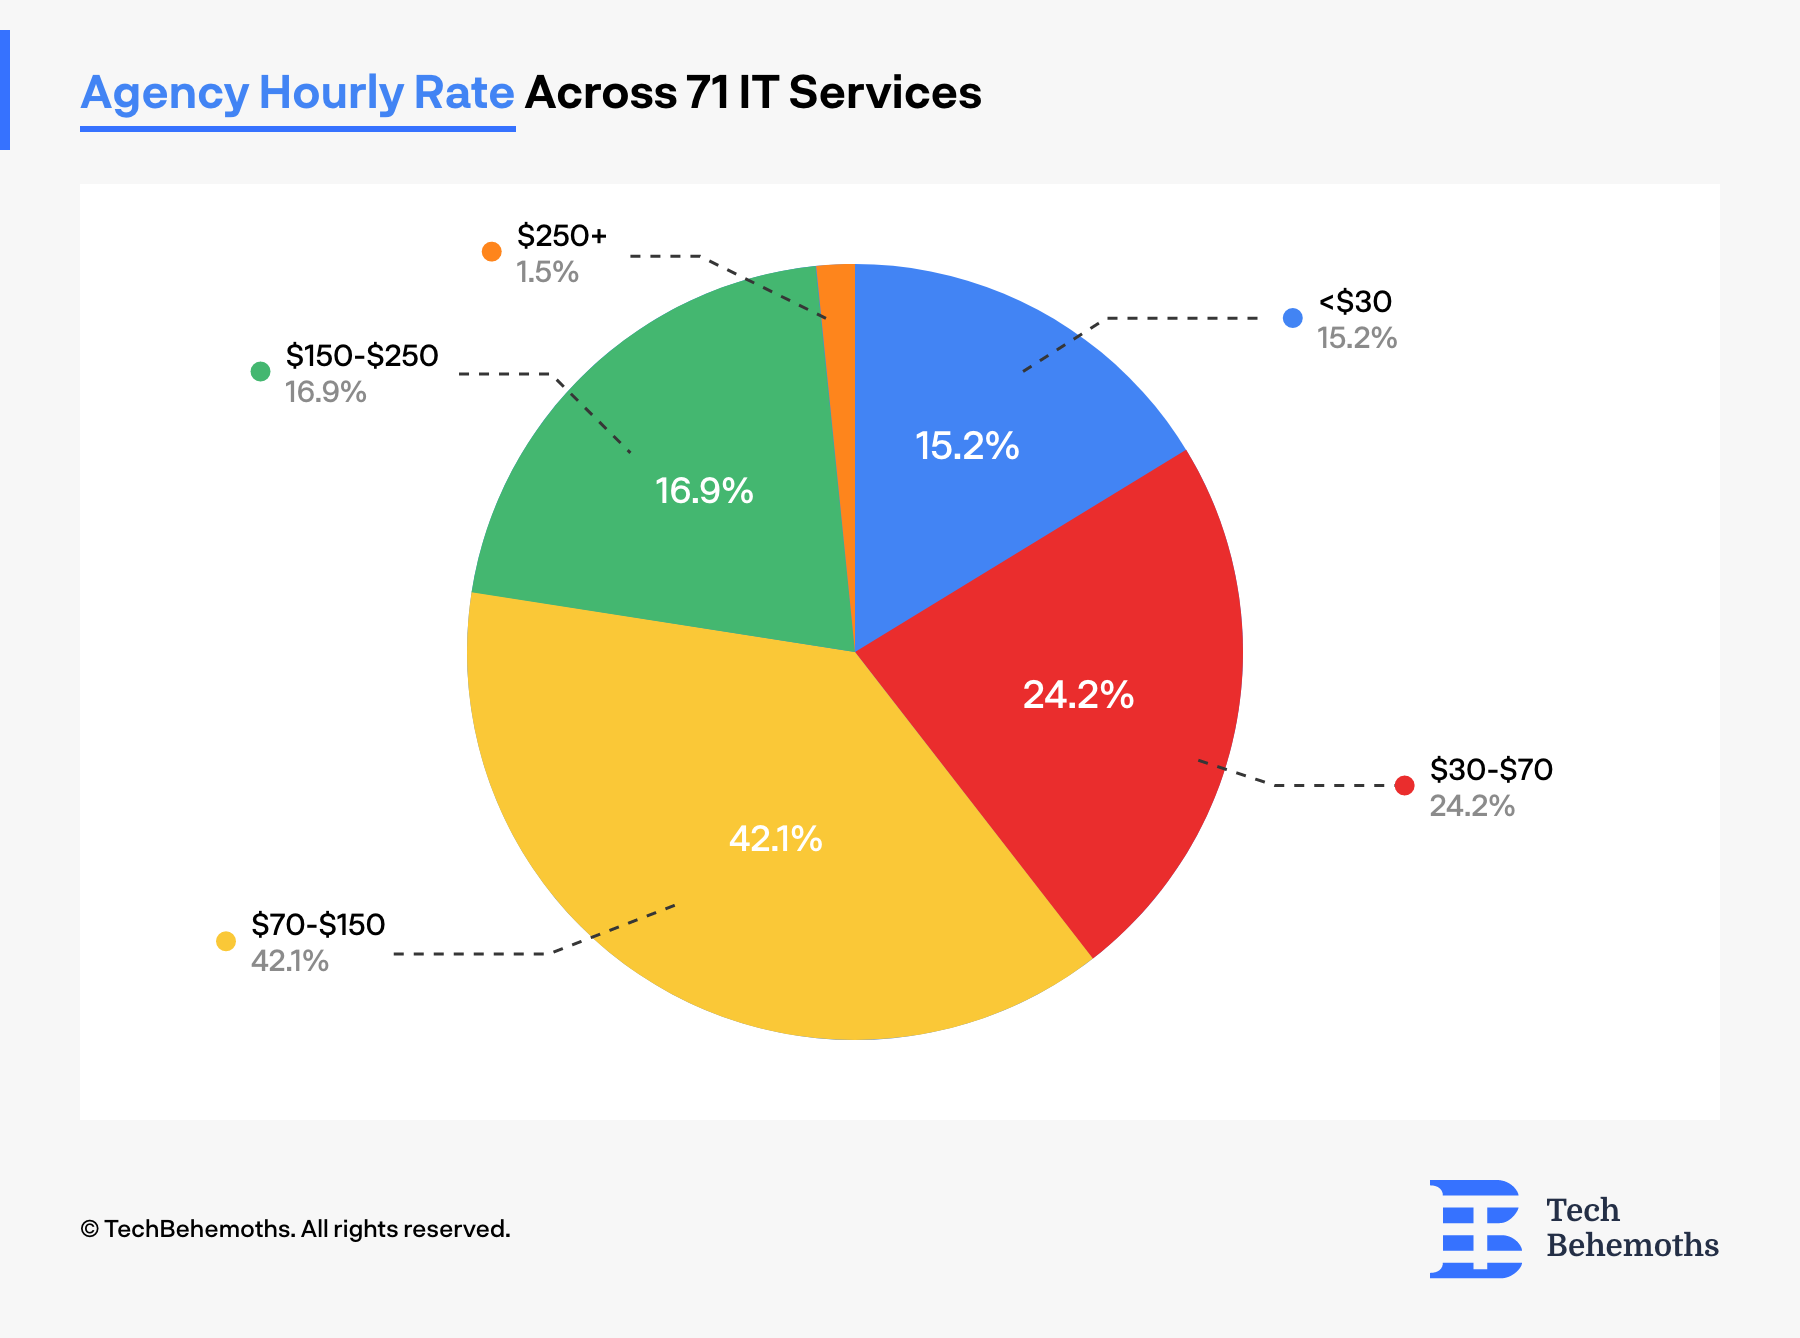 Agency Hourly Rate Across 71 IT Services